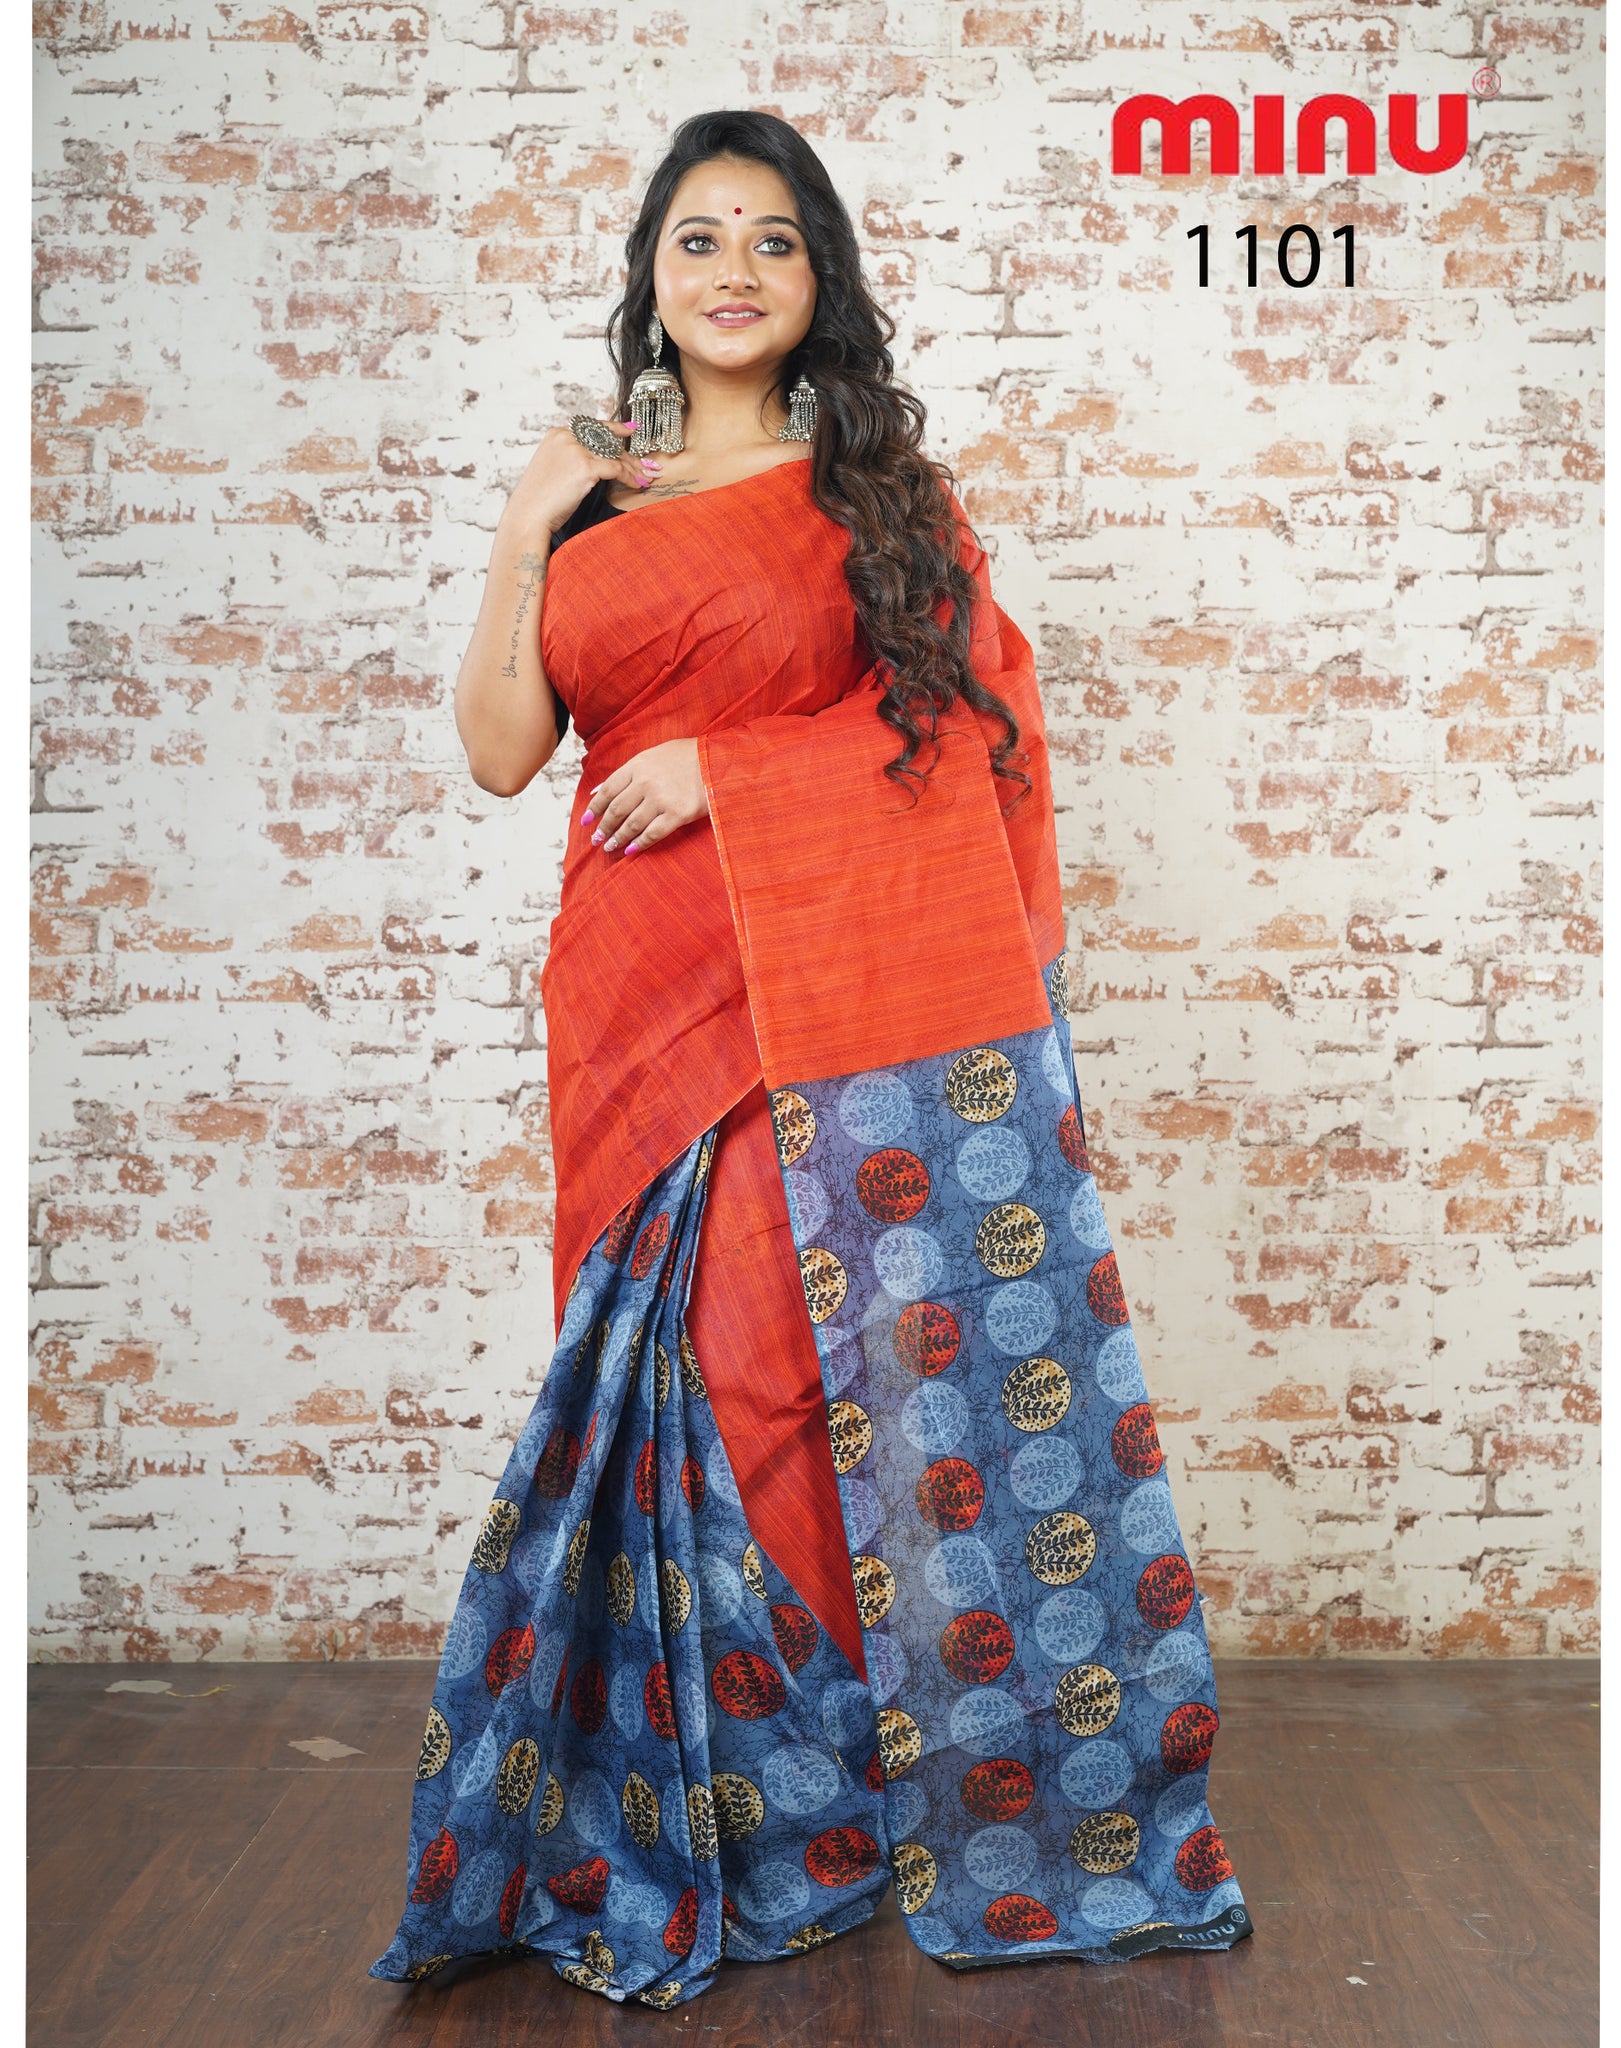 Red and Blue Saree with Circular Print at the Bottom